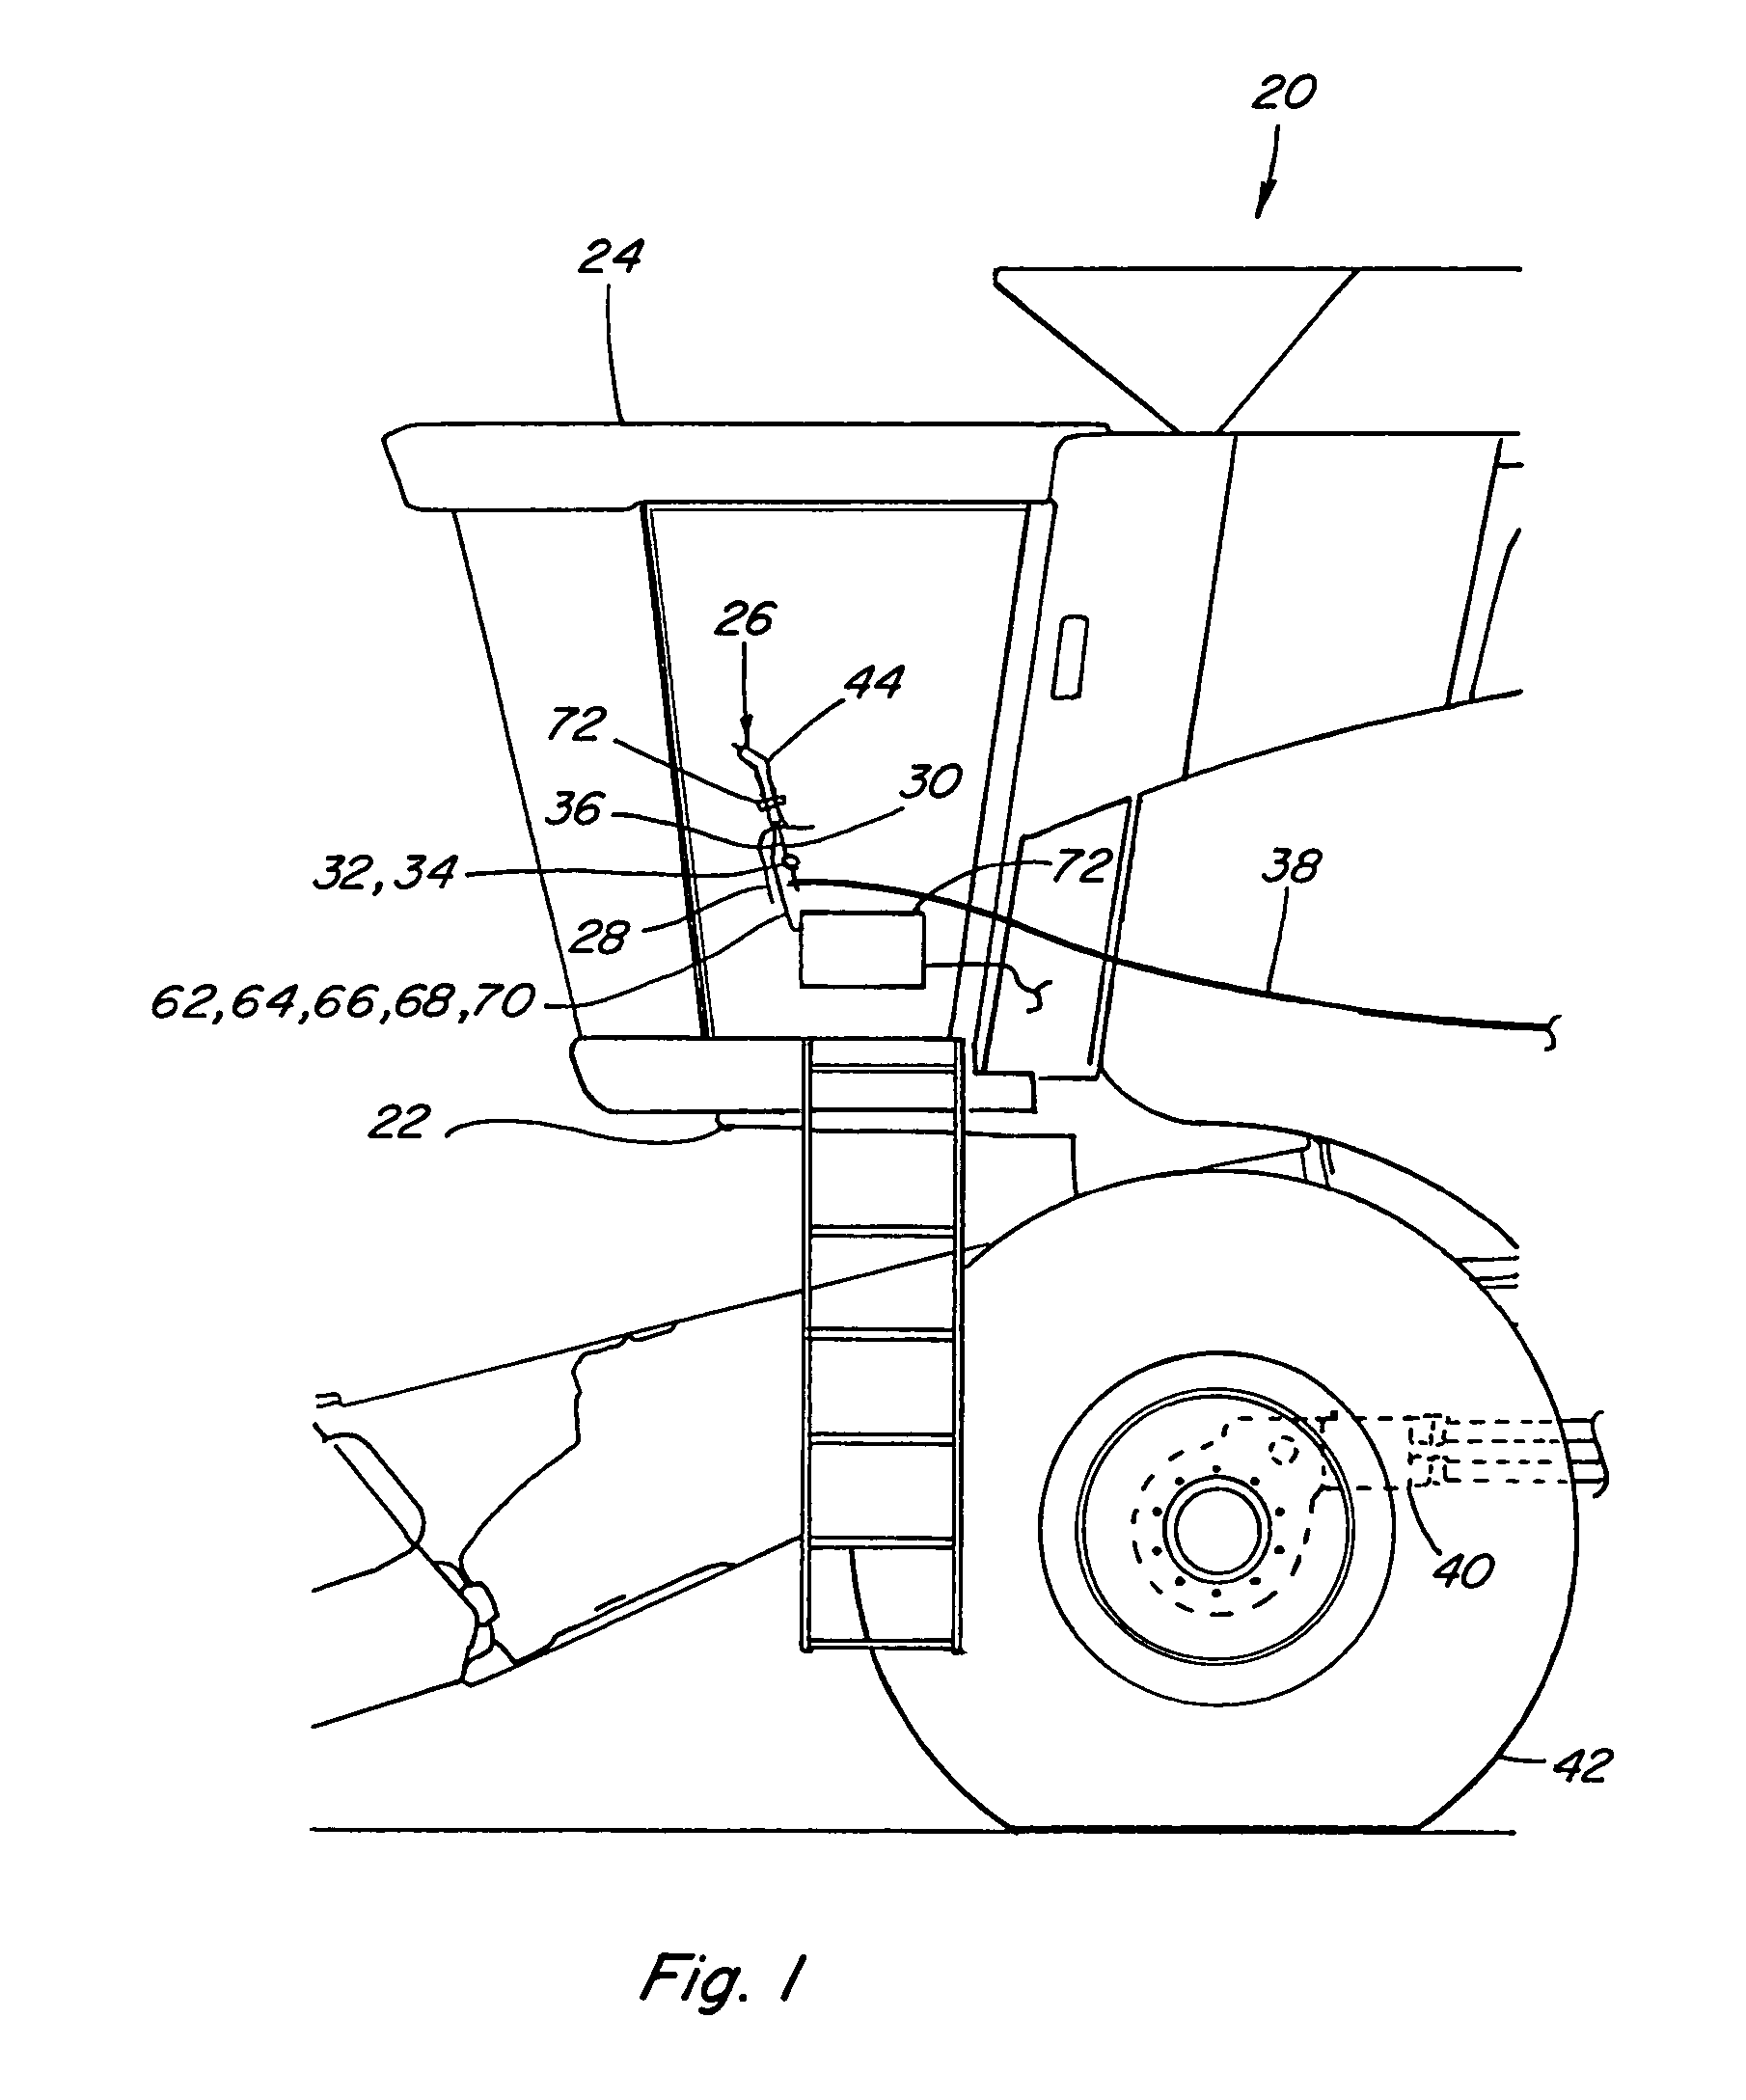 Adjustable combination propulsion and control handle for a work machine